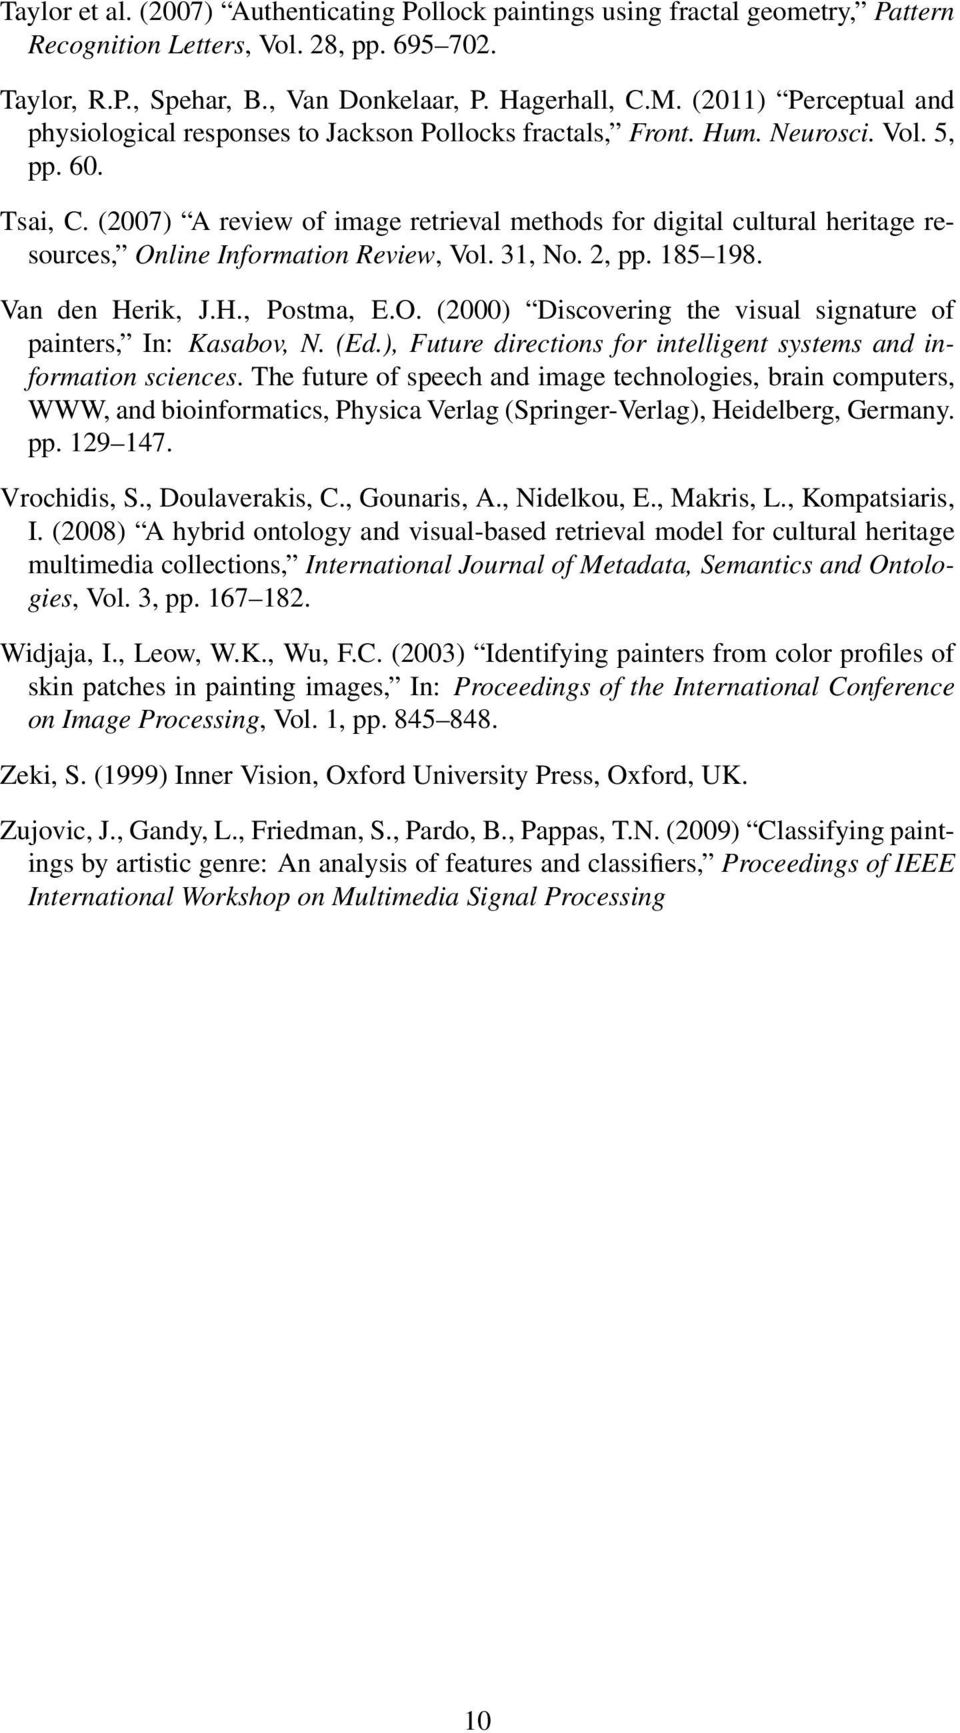 (2007) A review of image retrieval methods for digital cultural heritage resources, Online Information Review, Vol. 31, No. 2, pp. 185 198. Van den Herik, J.H., Postma, E.O. (2000) Discovering the visual signature of painters, In: Kasabov, N.